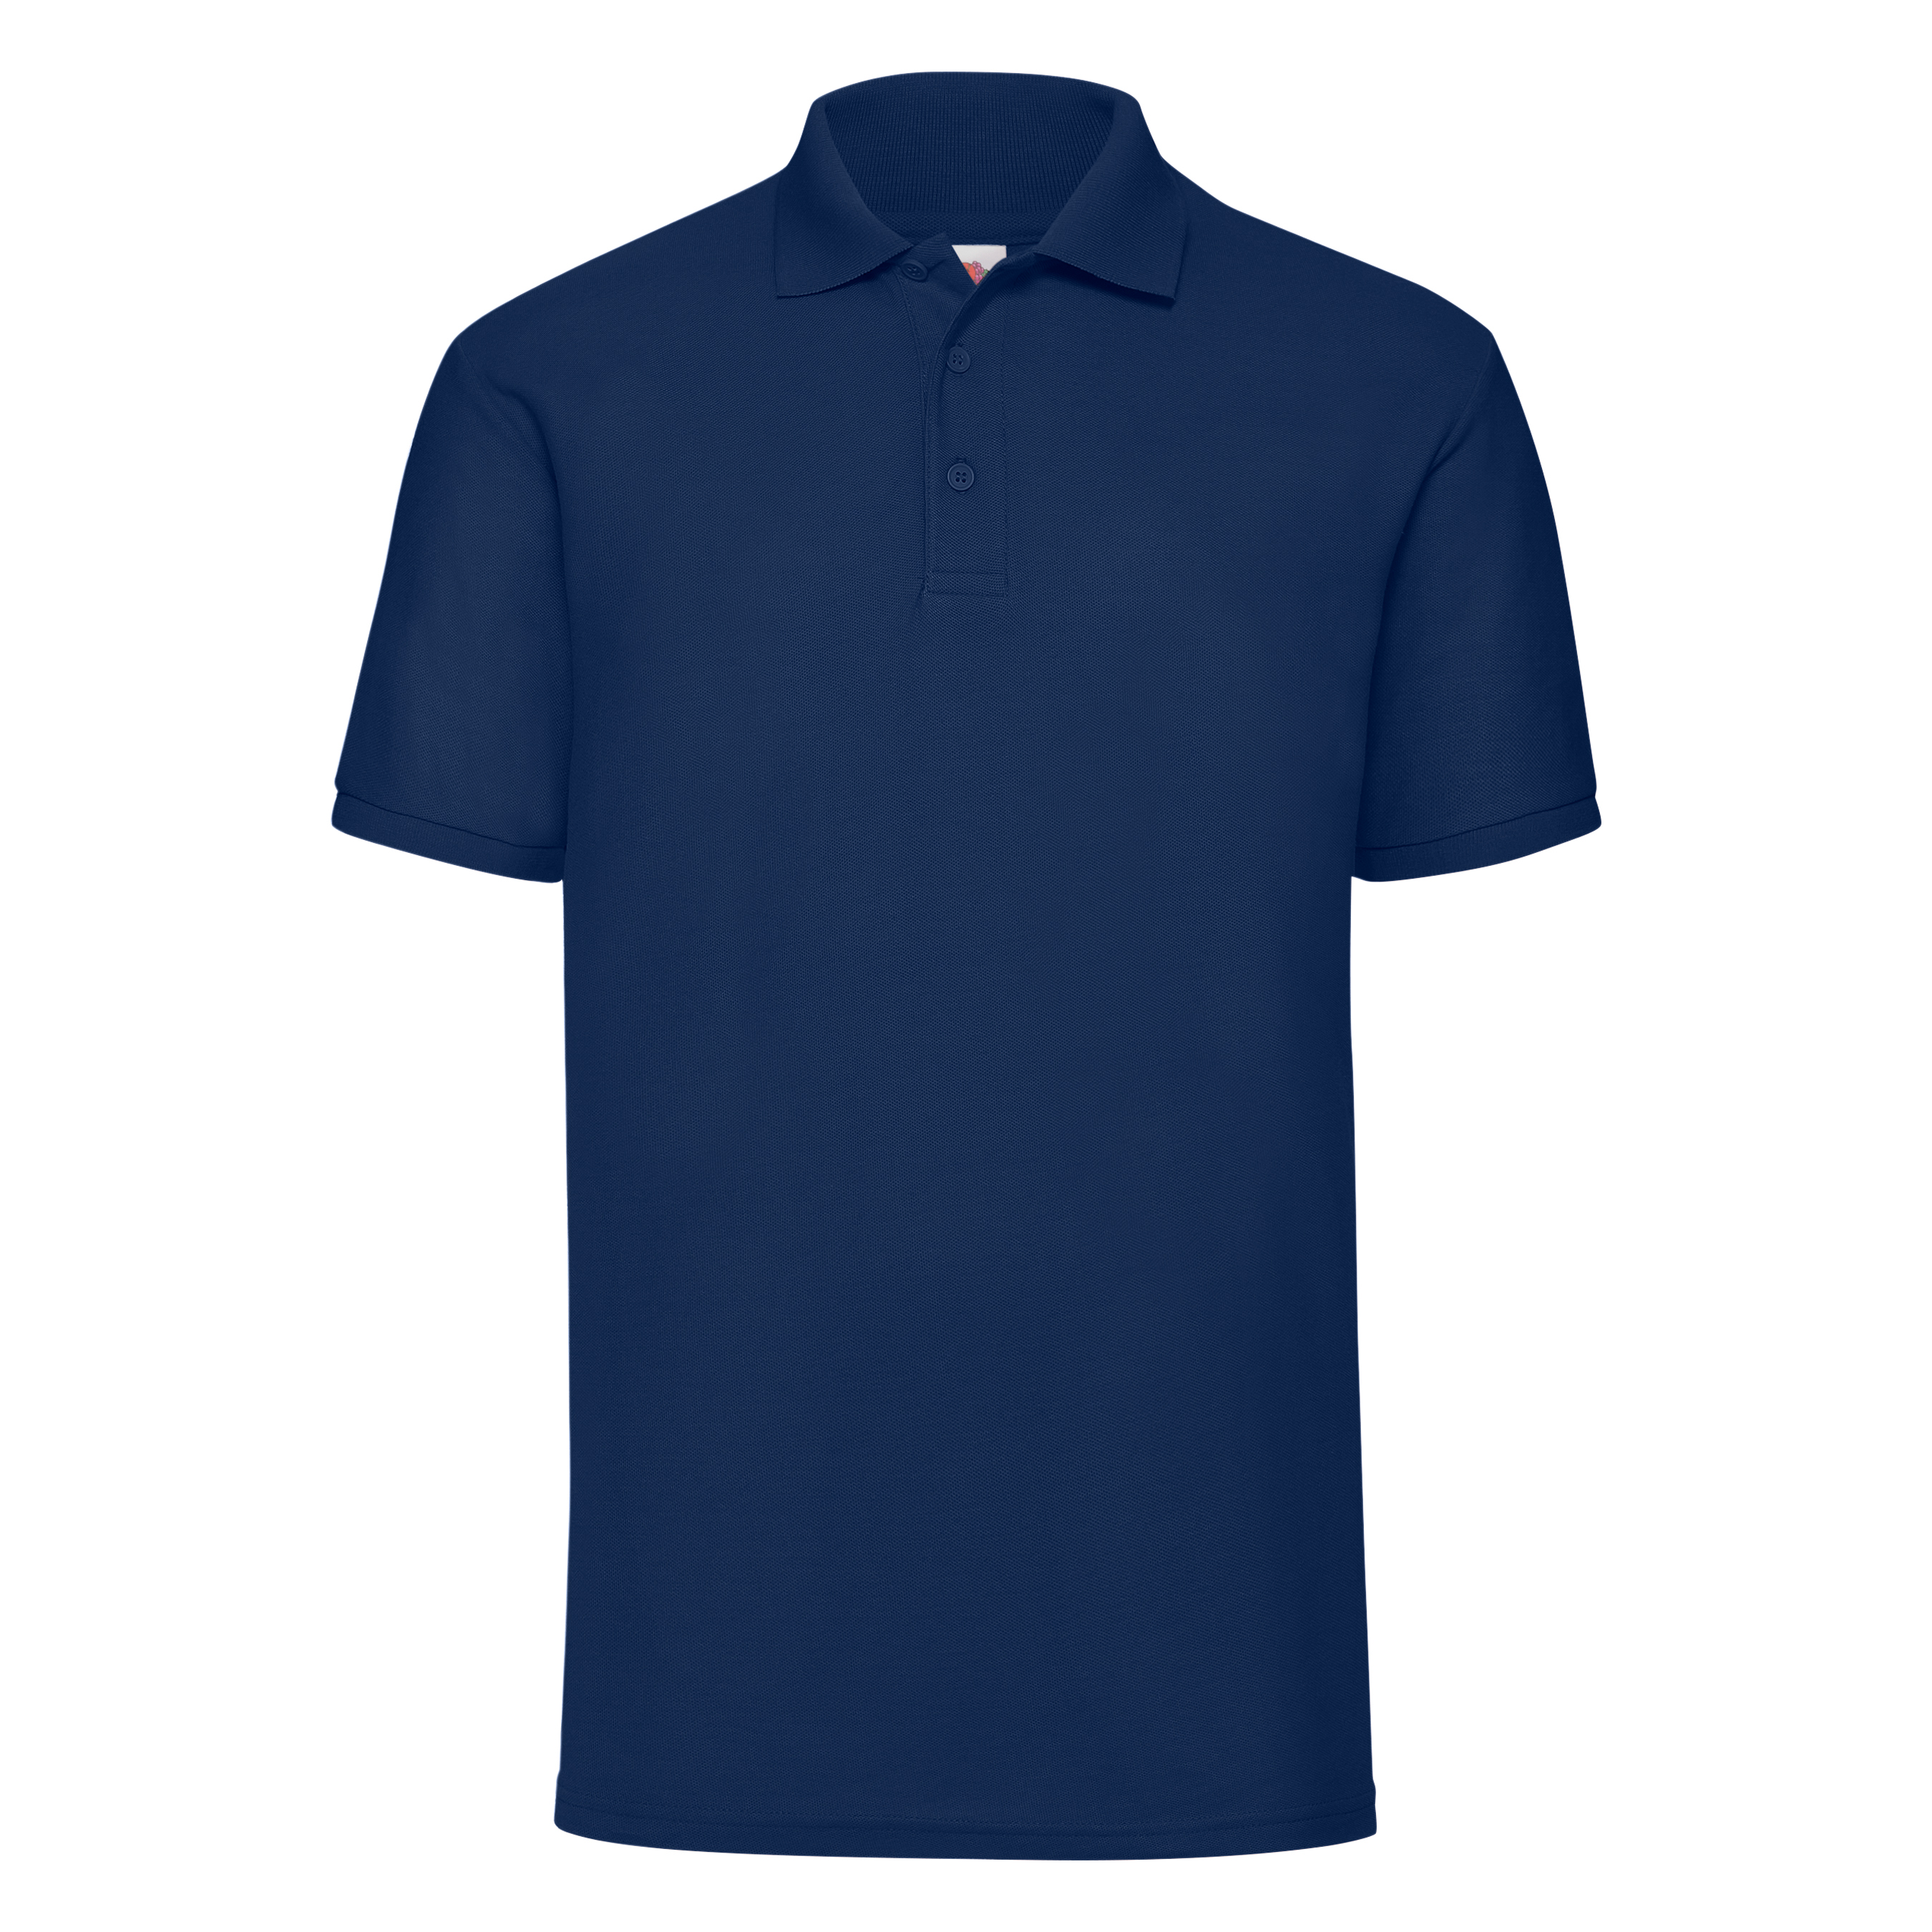 ax-httpswebsystems.s3.amazonaws.comtmp_for_downloadfruit-of-the-loom-65-35-polo-navy.jpg